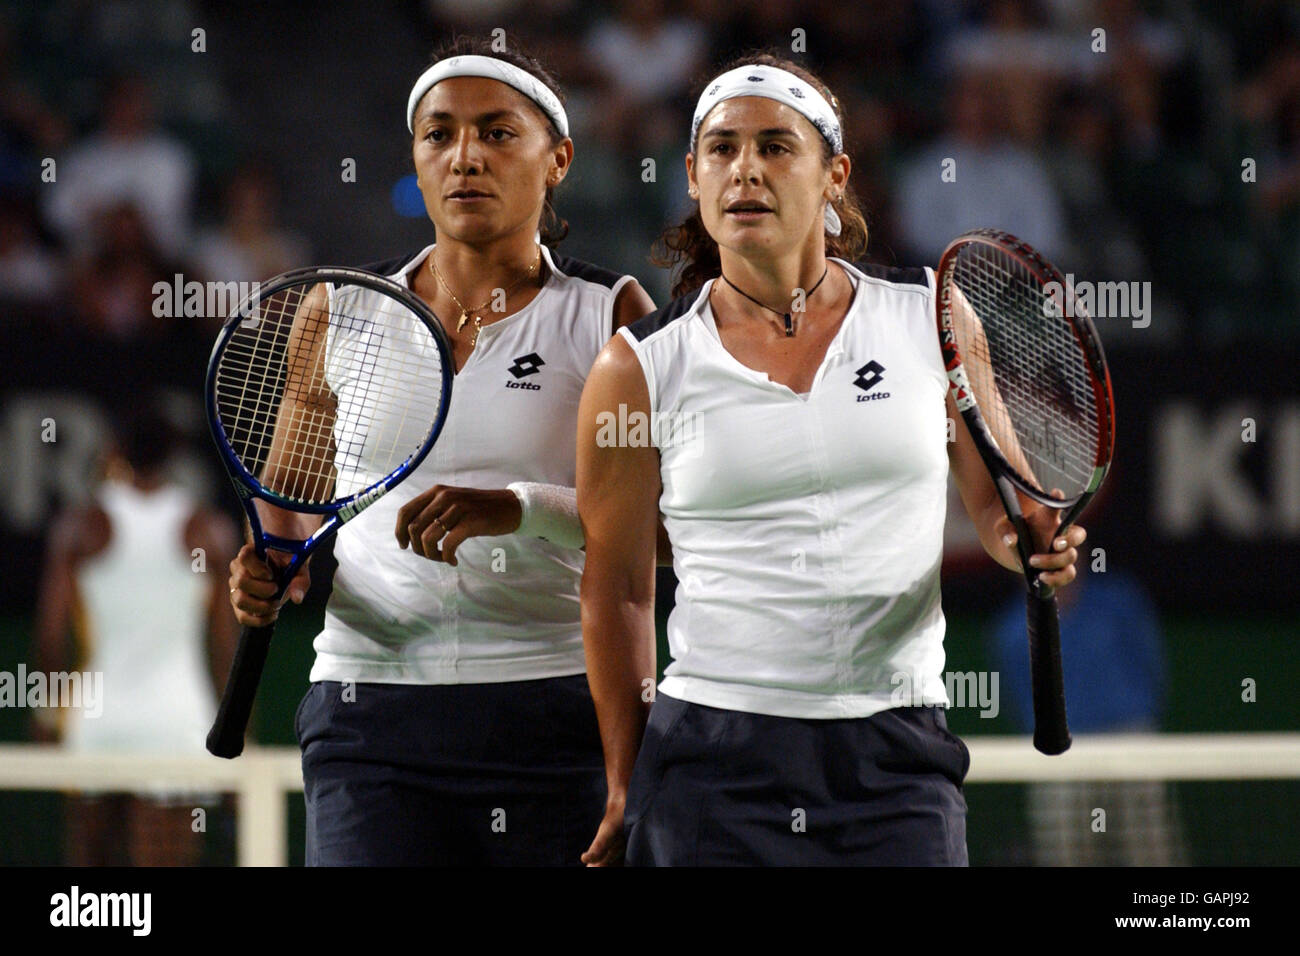 Tennis - Australian Open - Womens Doubles Final. Virginia Ruano Pascual and Paola Suarez during their match with Serena Williams and Venus Williams (USA) Stock Photo